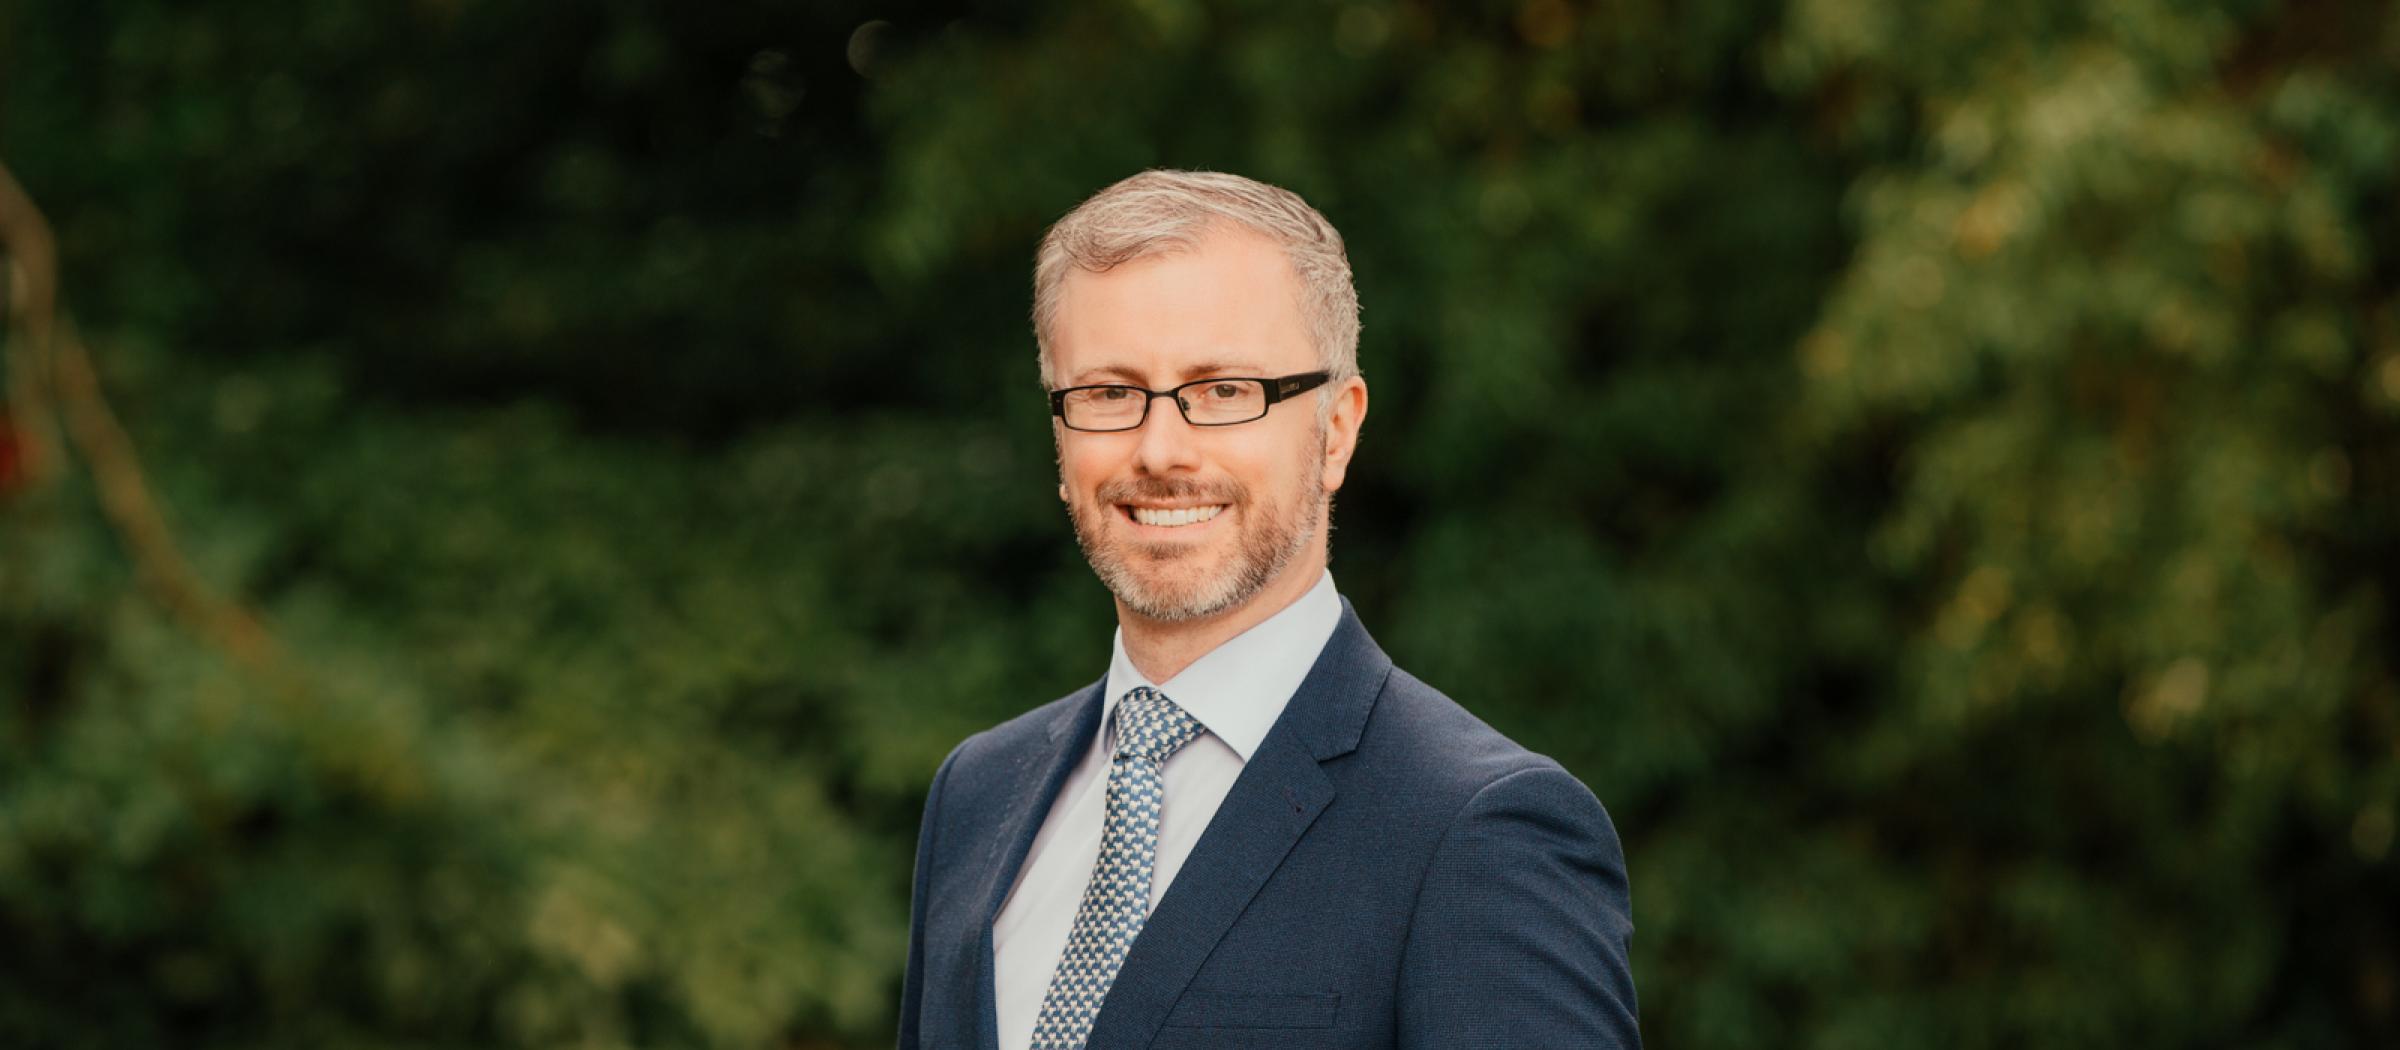 Profile photo of Minister Roderic O'Gorman with trees in the background